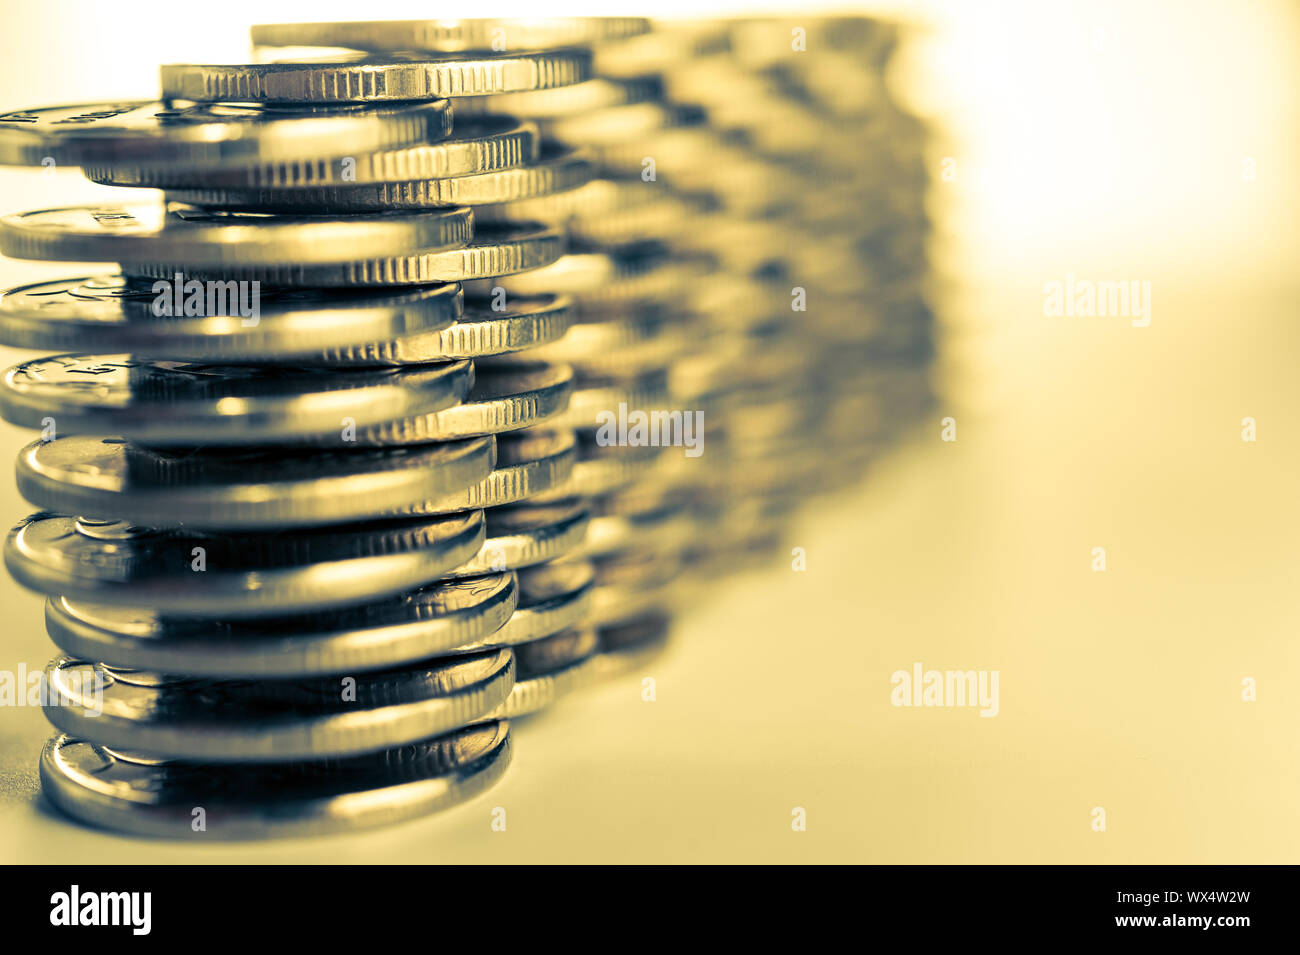 Stack of golden coins macro. Rows of coins for finance and banking concept. Economy trends background for business idea. Stock Photo